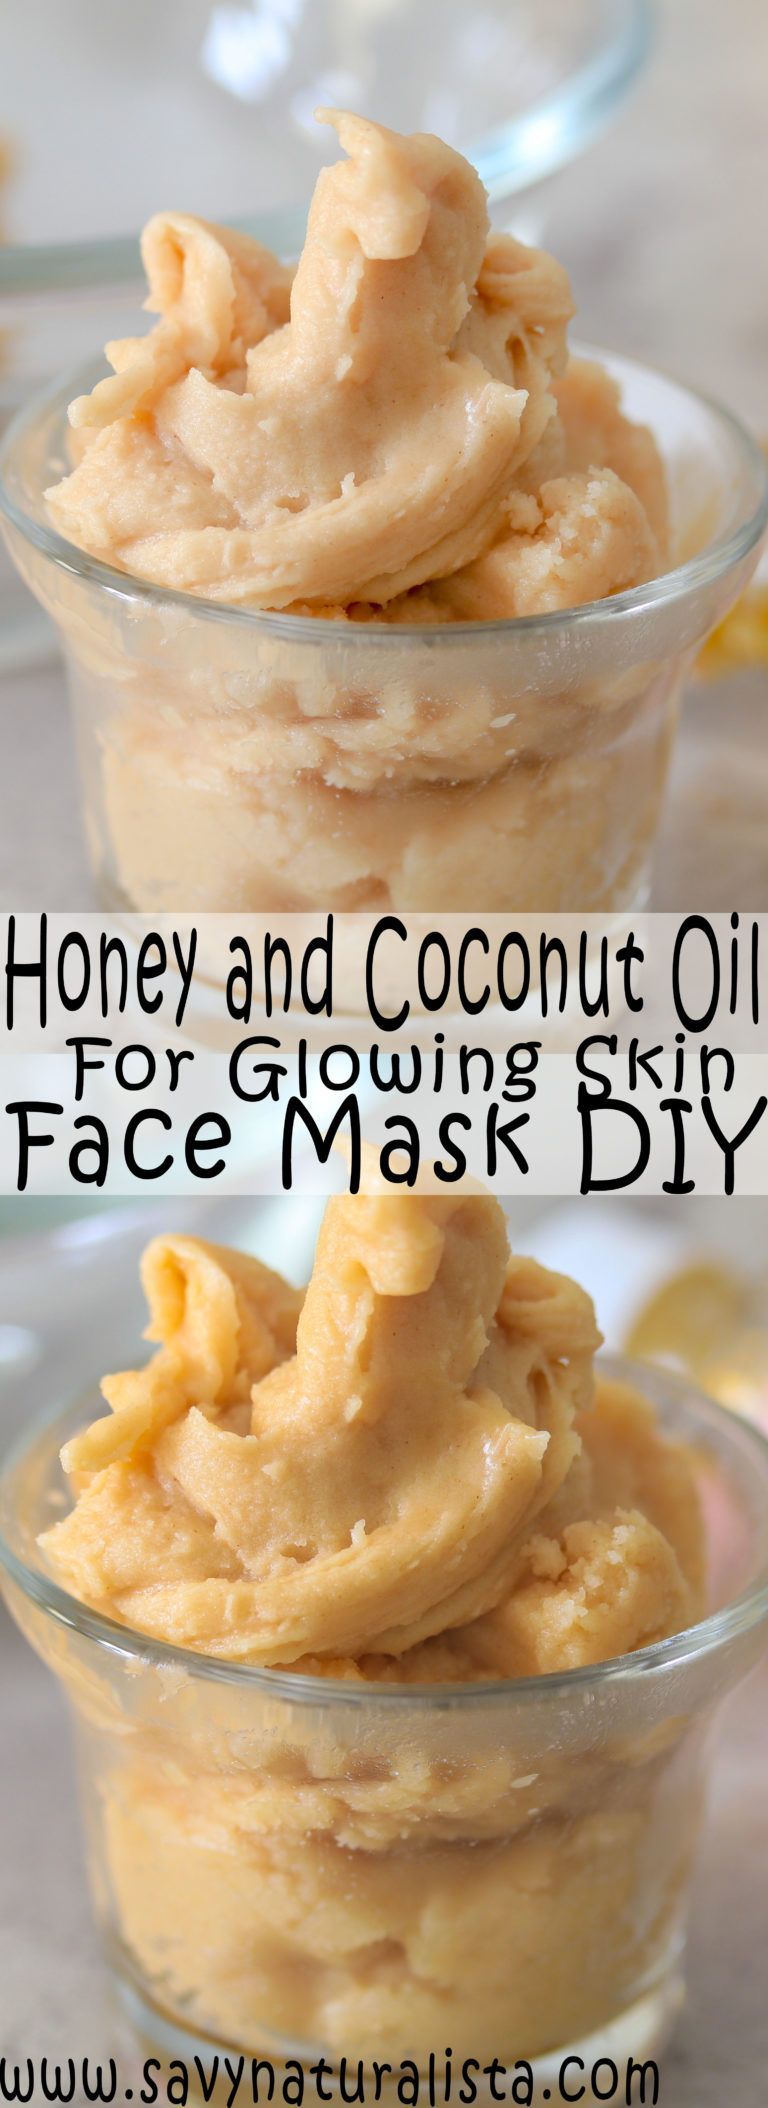 Honey and Coconut Oil Glowing Face Mask -   13 skin care Coconut Oil faces ideas